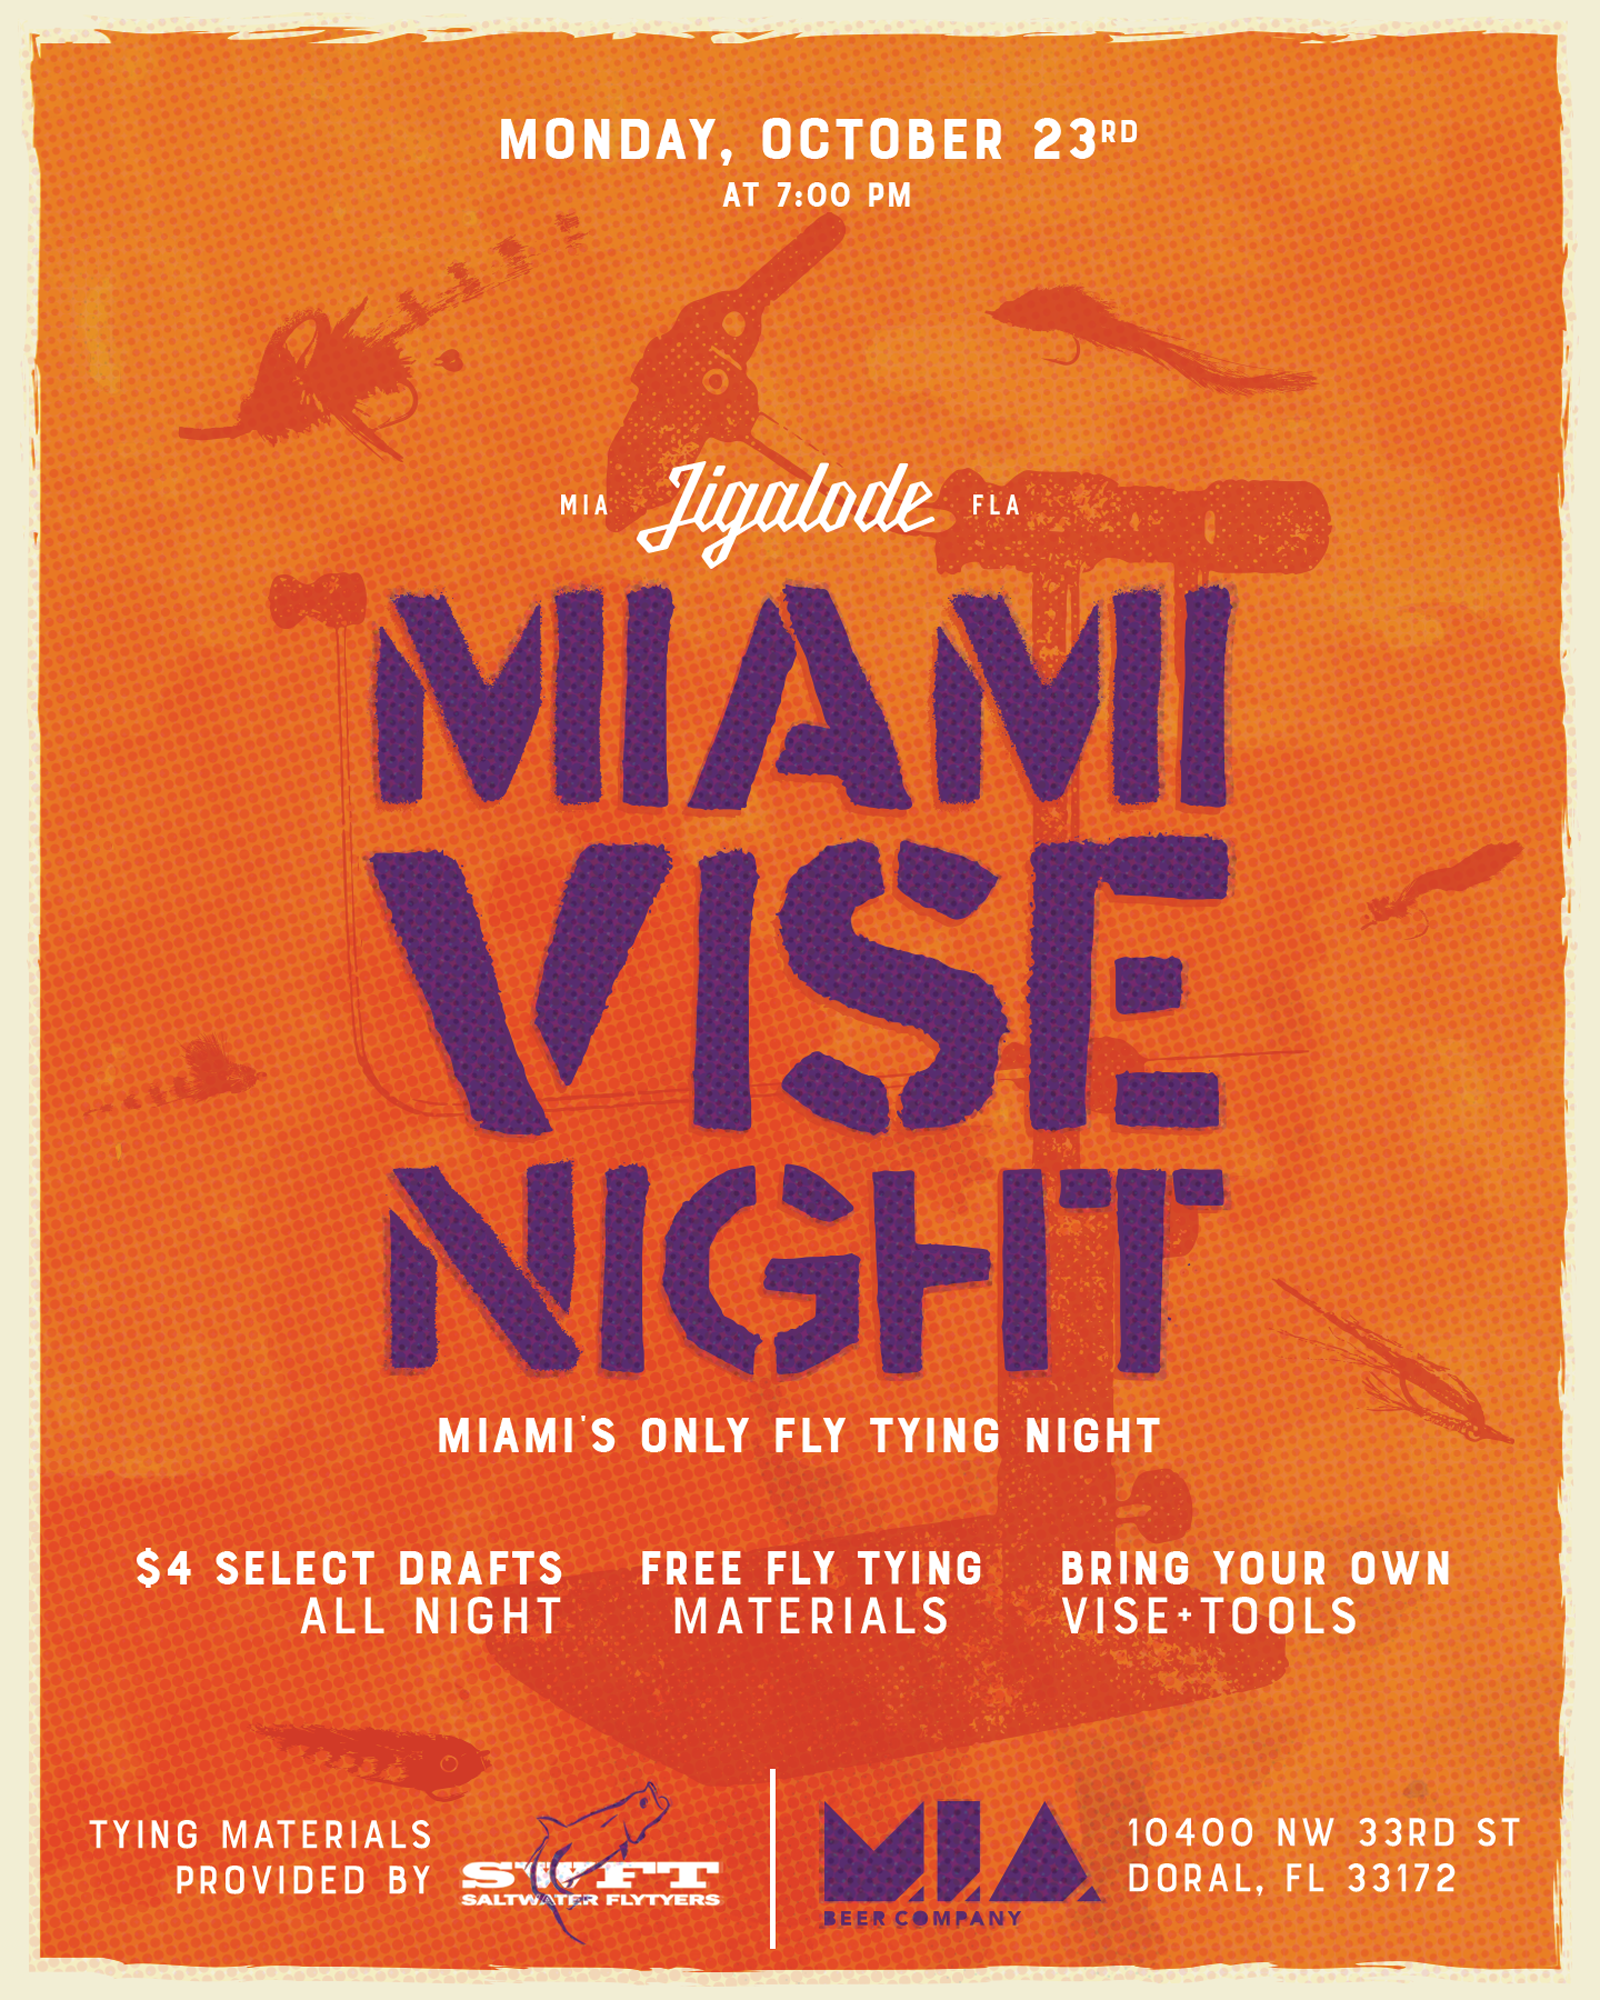 Miami, Fly Tying Night, Jigalode, Fishing, Fly Fishing, Oyster Creek Outfitters, Salt Water Fly Tyers, Fly Fishing, Florida Keys, West Palm Beach, MIA Beer Company, MIA Brewing, Tarpon, Snook, Redfish, Bonefish, Trout